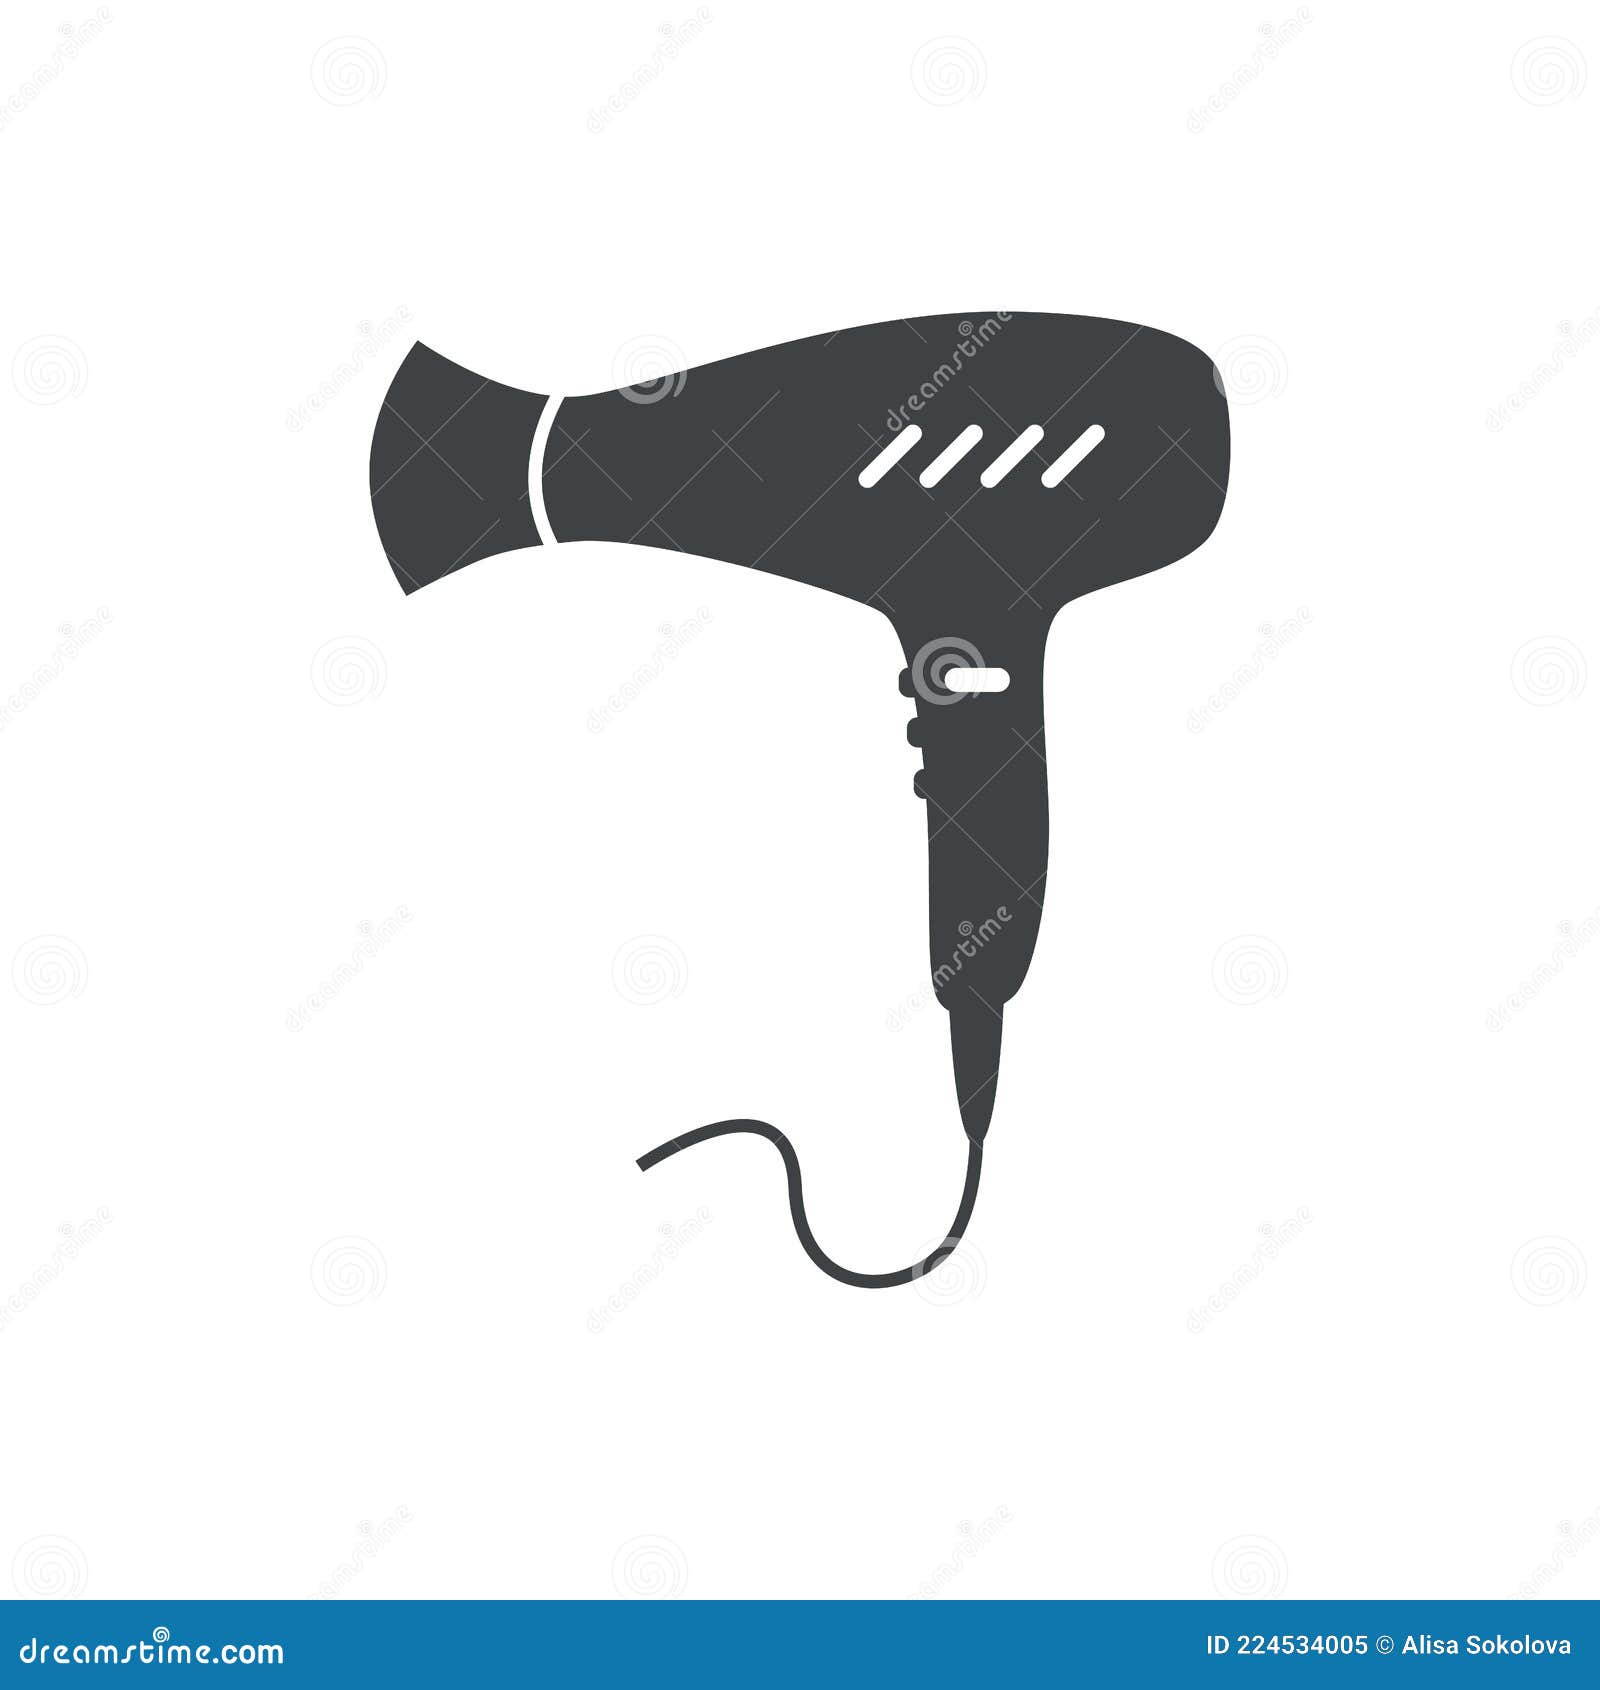 Black Filled Hair Dryer Vector Icon Isolated on White Transparent Background.  Stock Vector - Illustration of styling, hair: 224534005